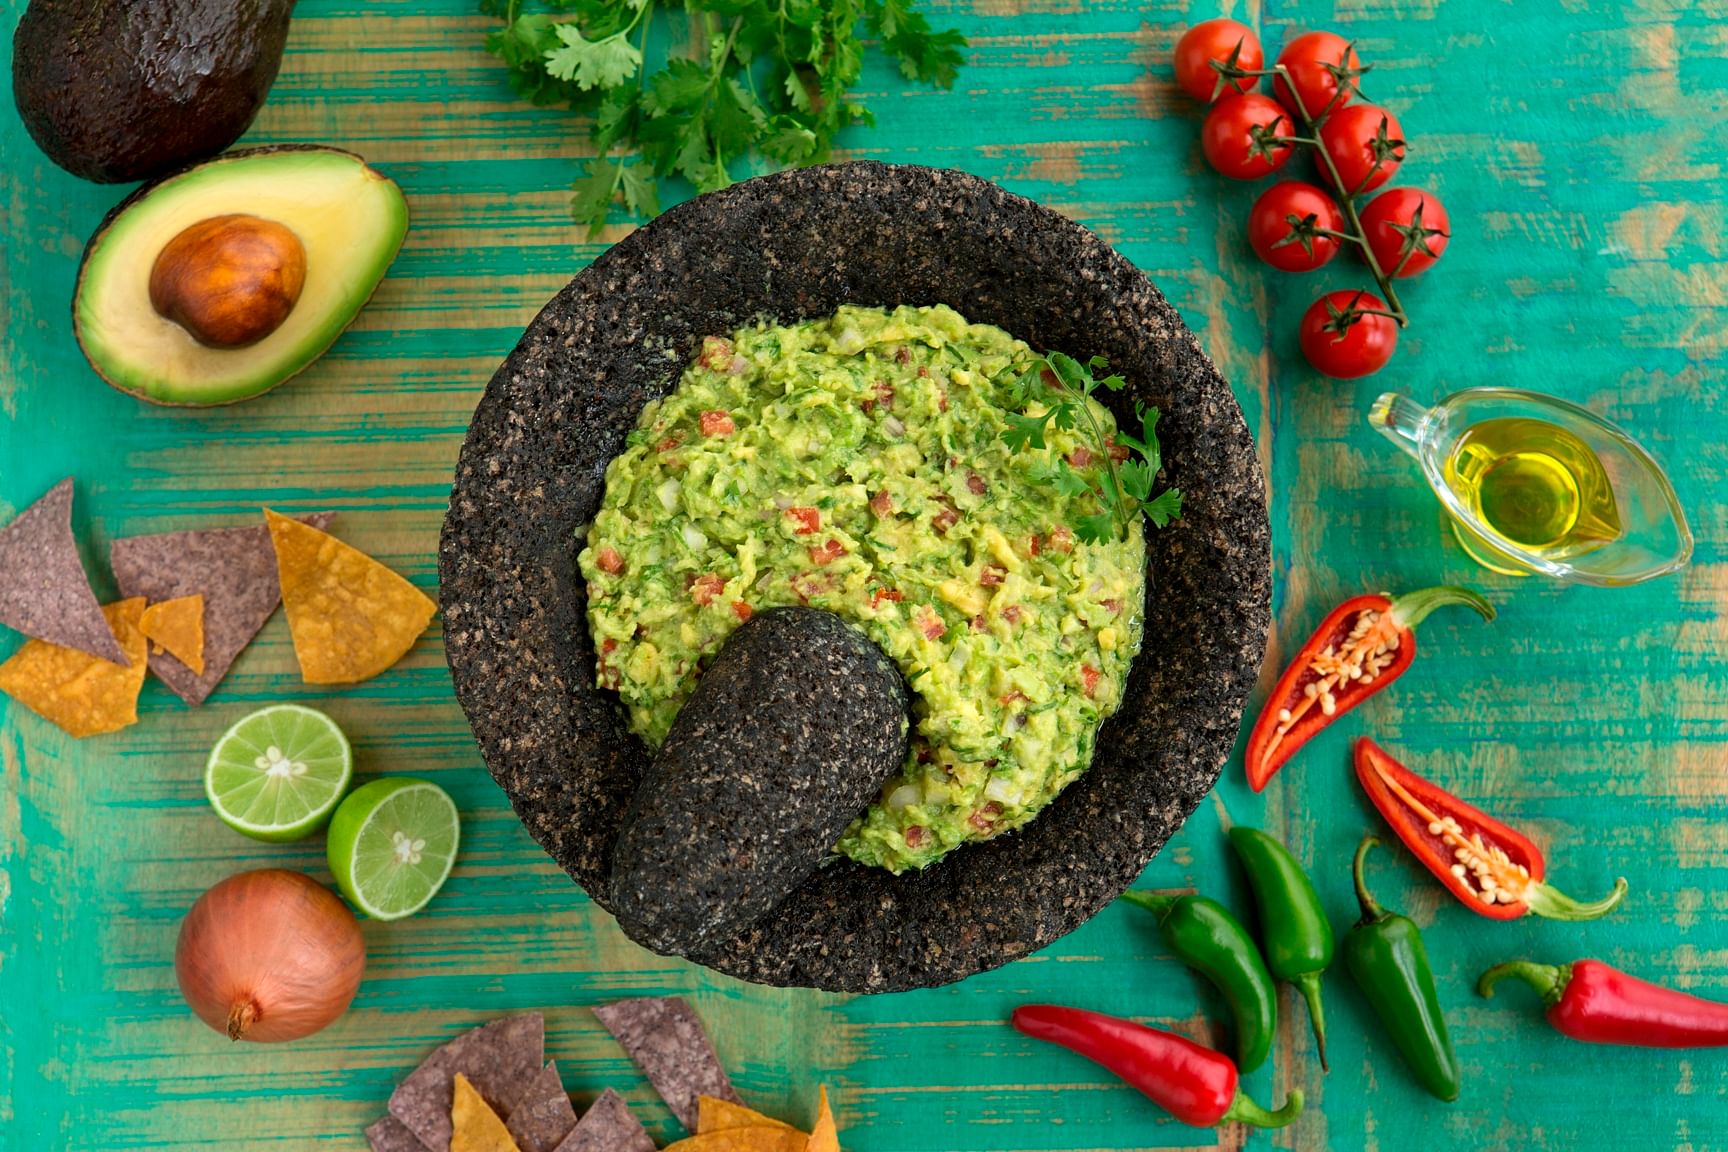 From dips to salads, Guacamole can be used as per one’s choice.